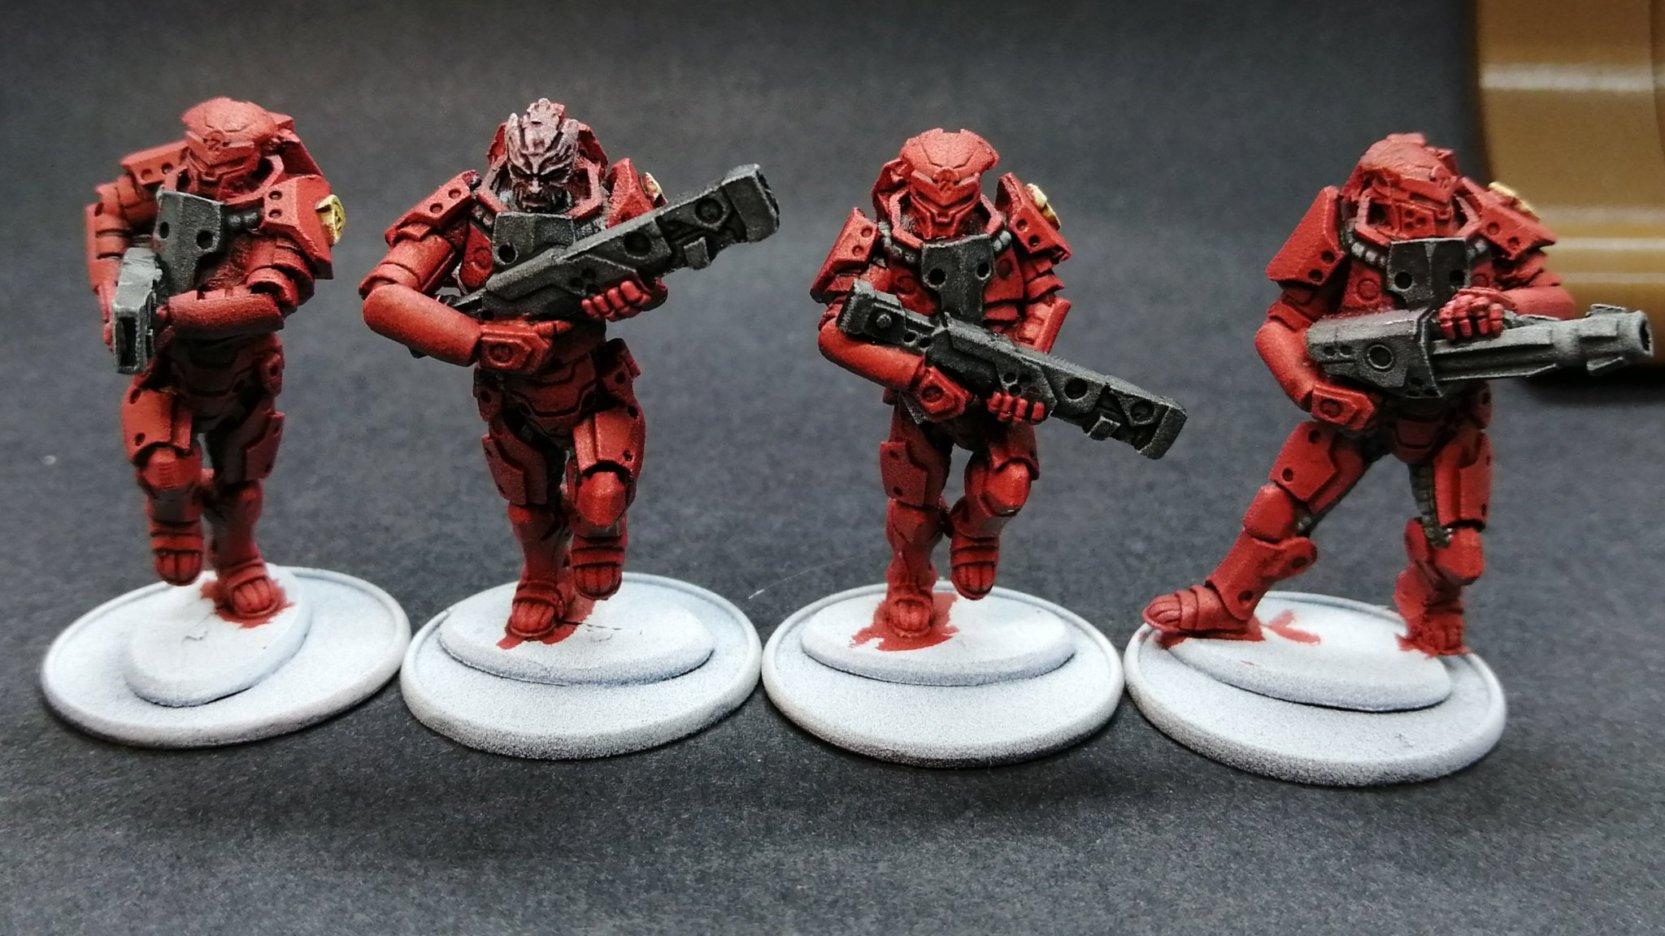 Army Painter Speed Paints, Other Games Open